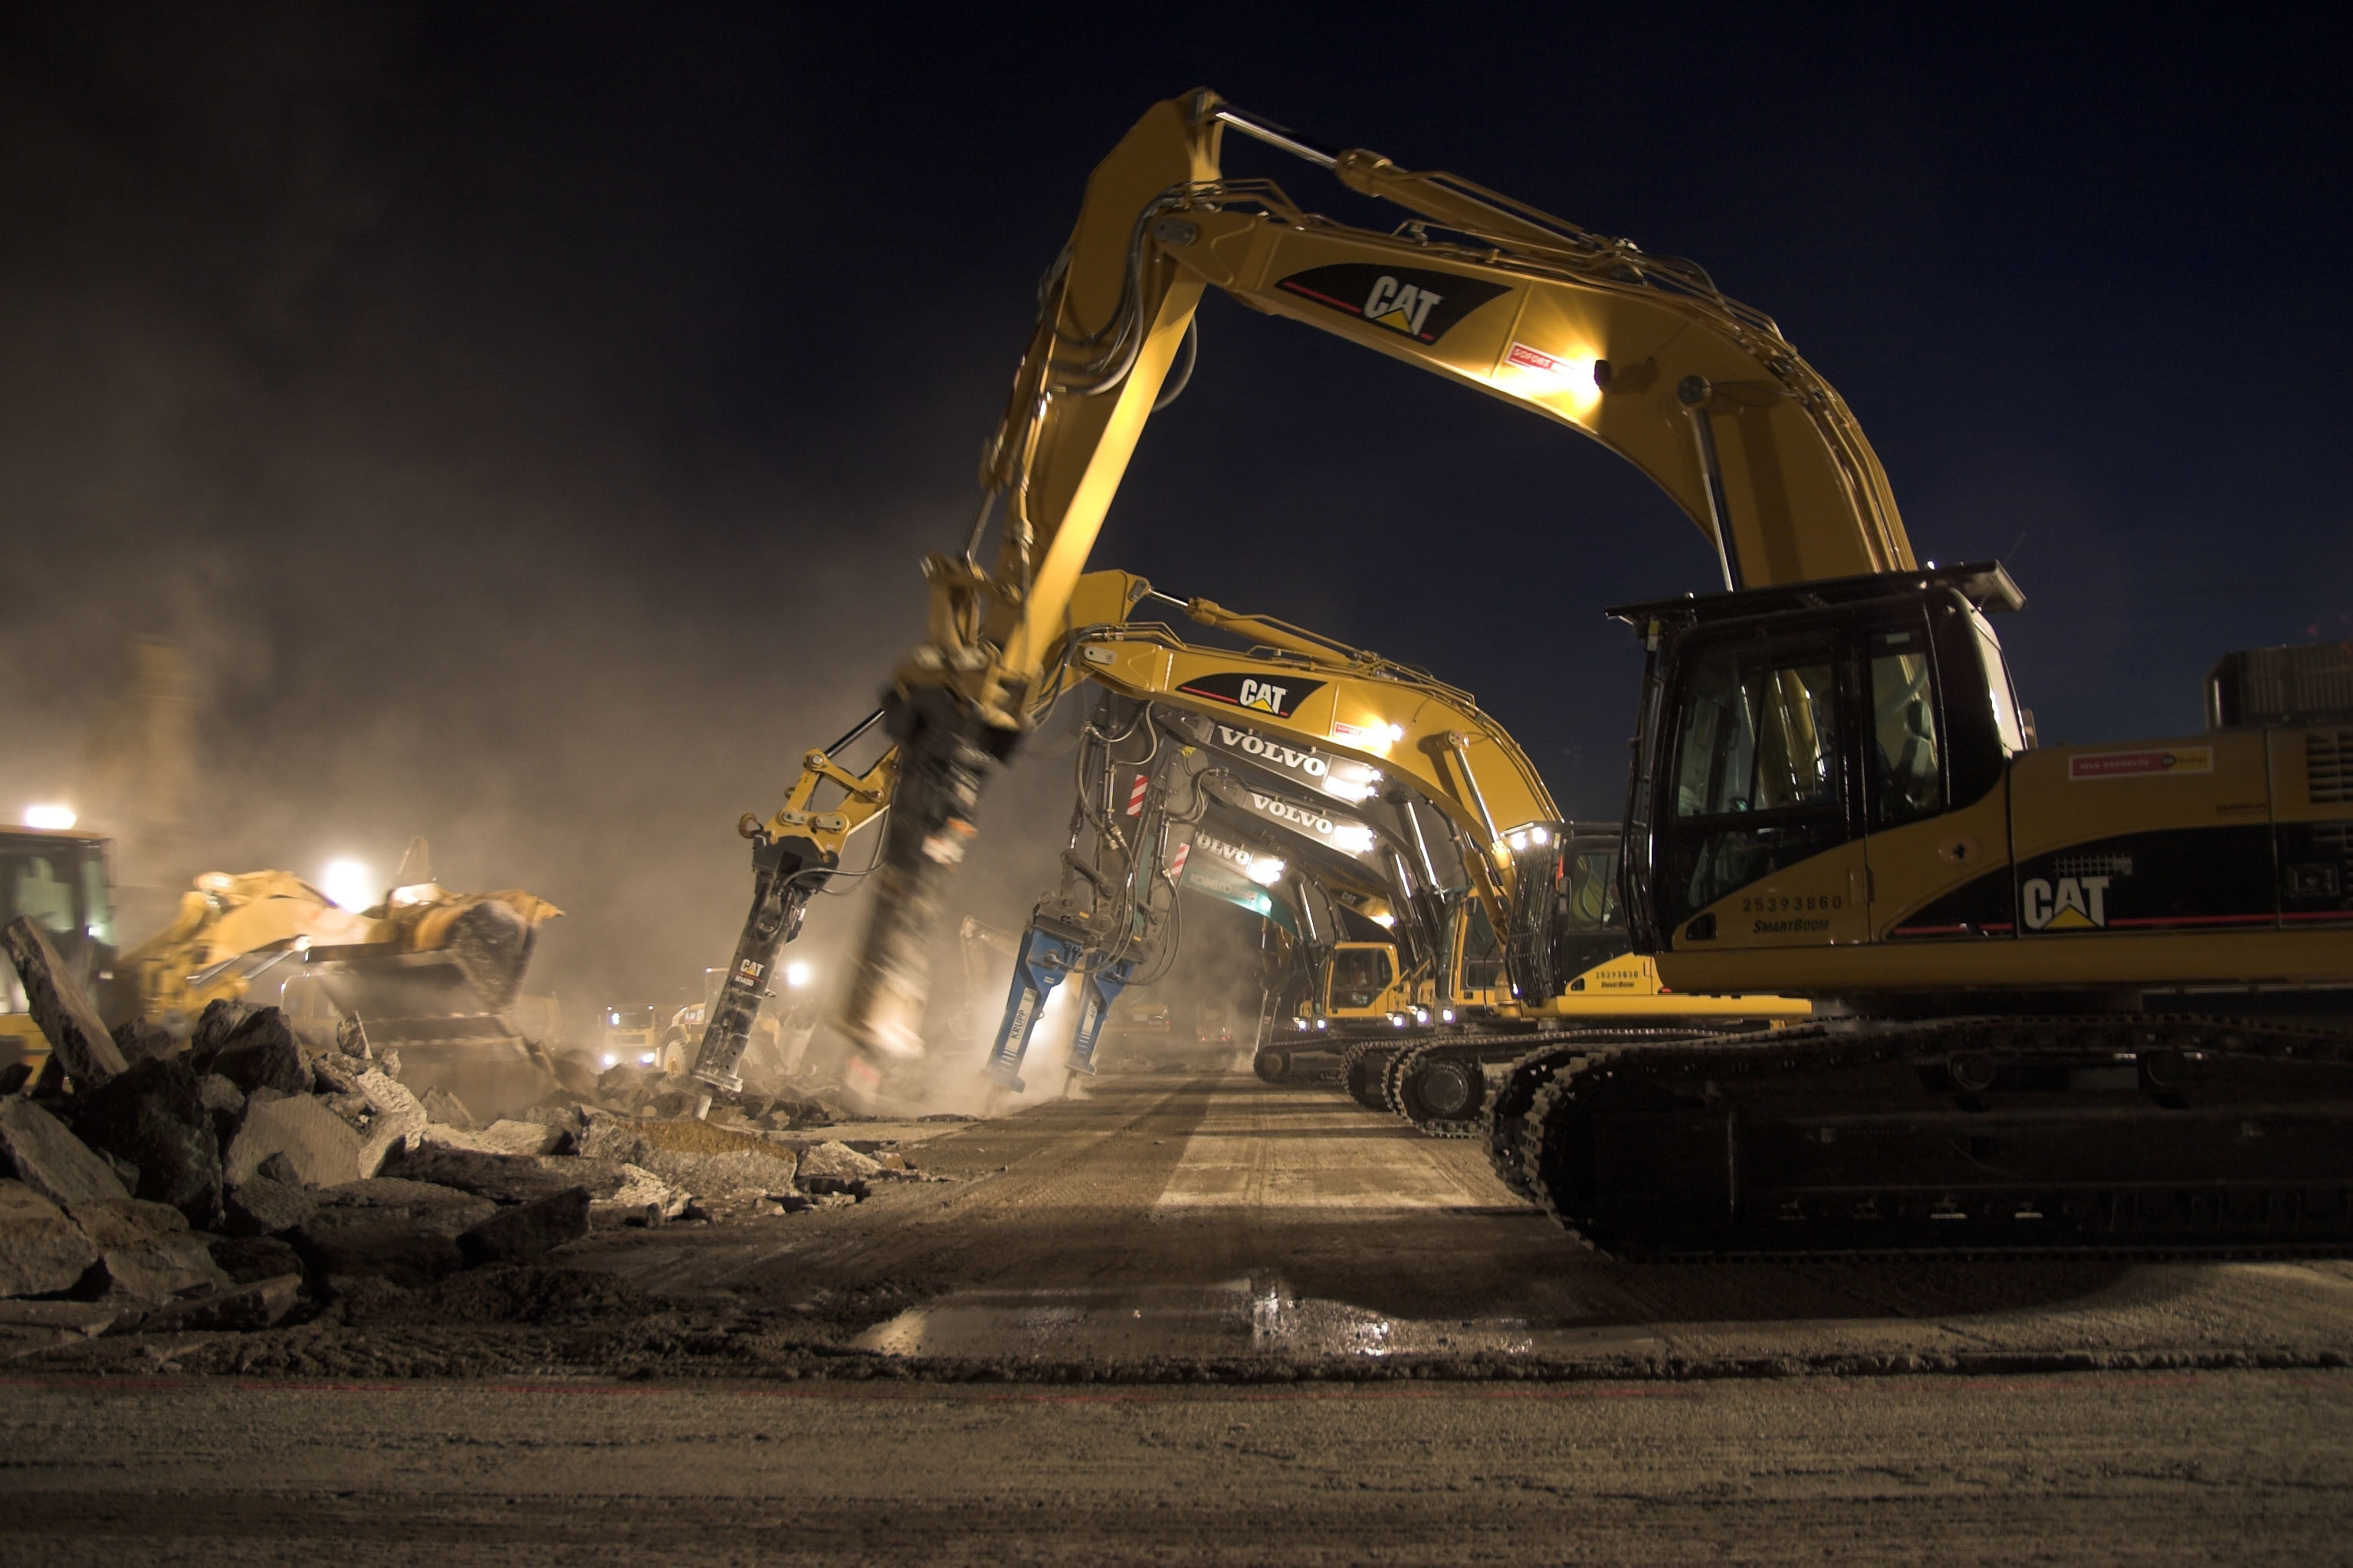 There May Be Competitors, But They Provide The Background - Caterpillar Machines Background - HD Wallpaper 